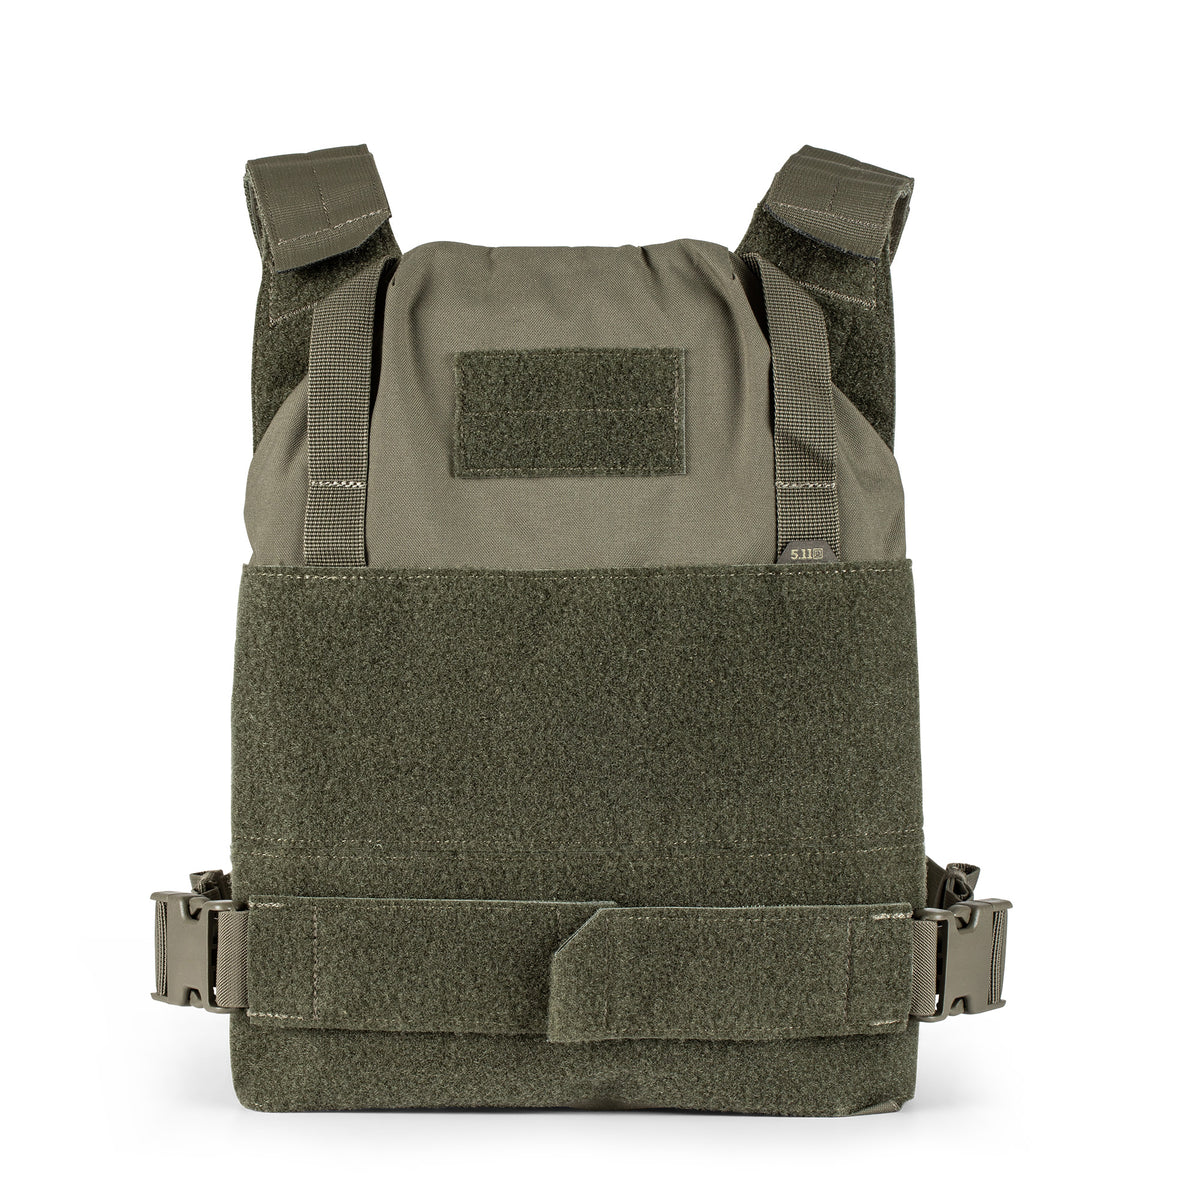 PRIME PLATE CARRIER – 5.11 Tactical Japan